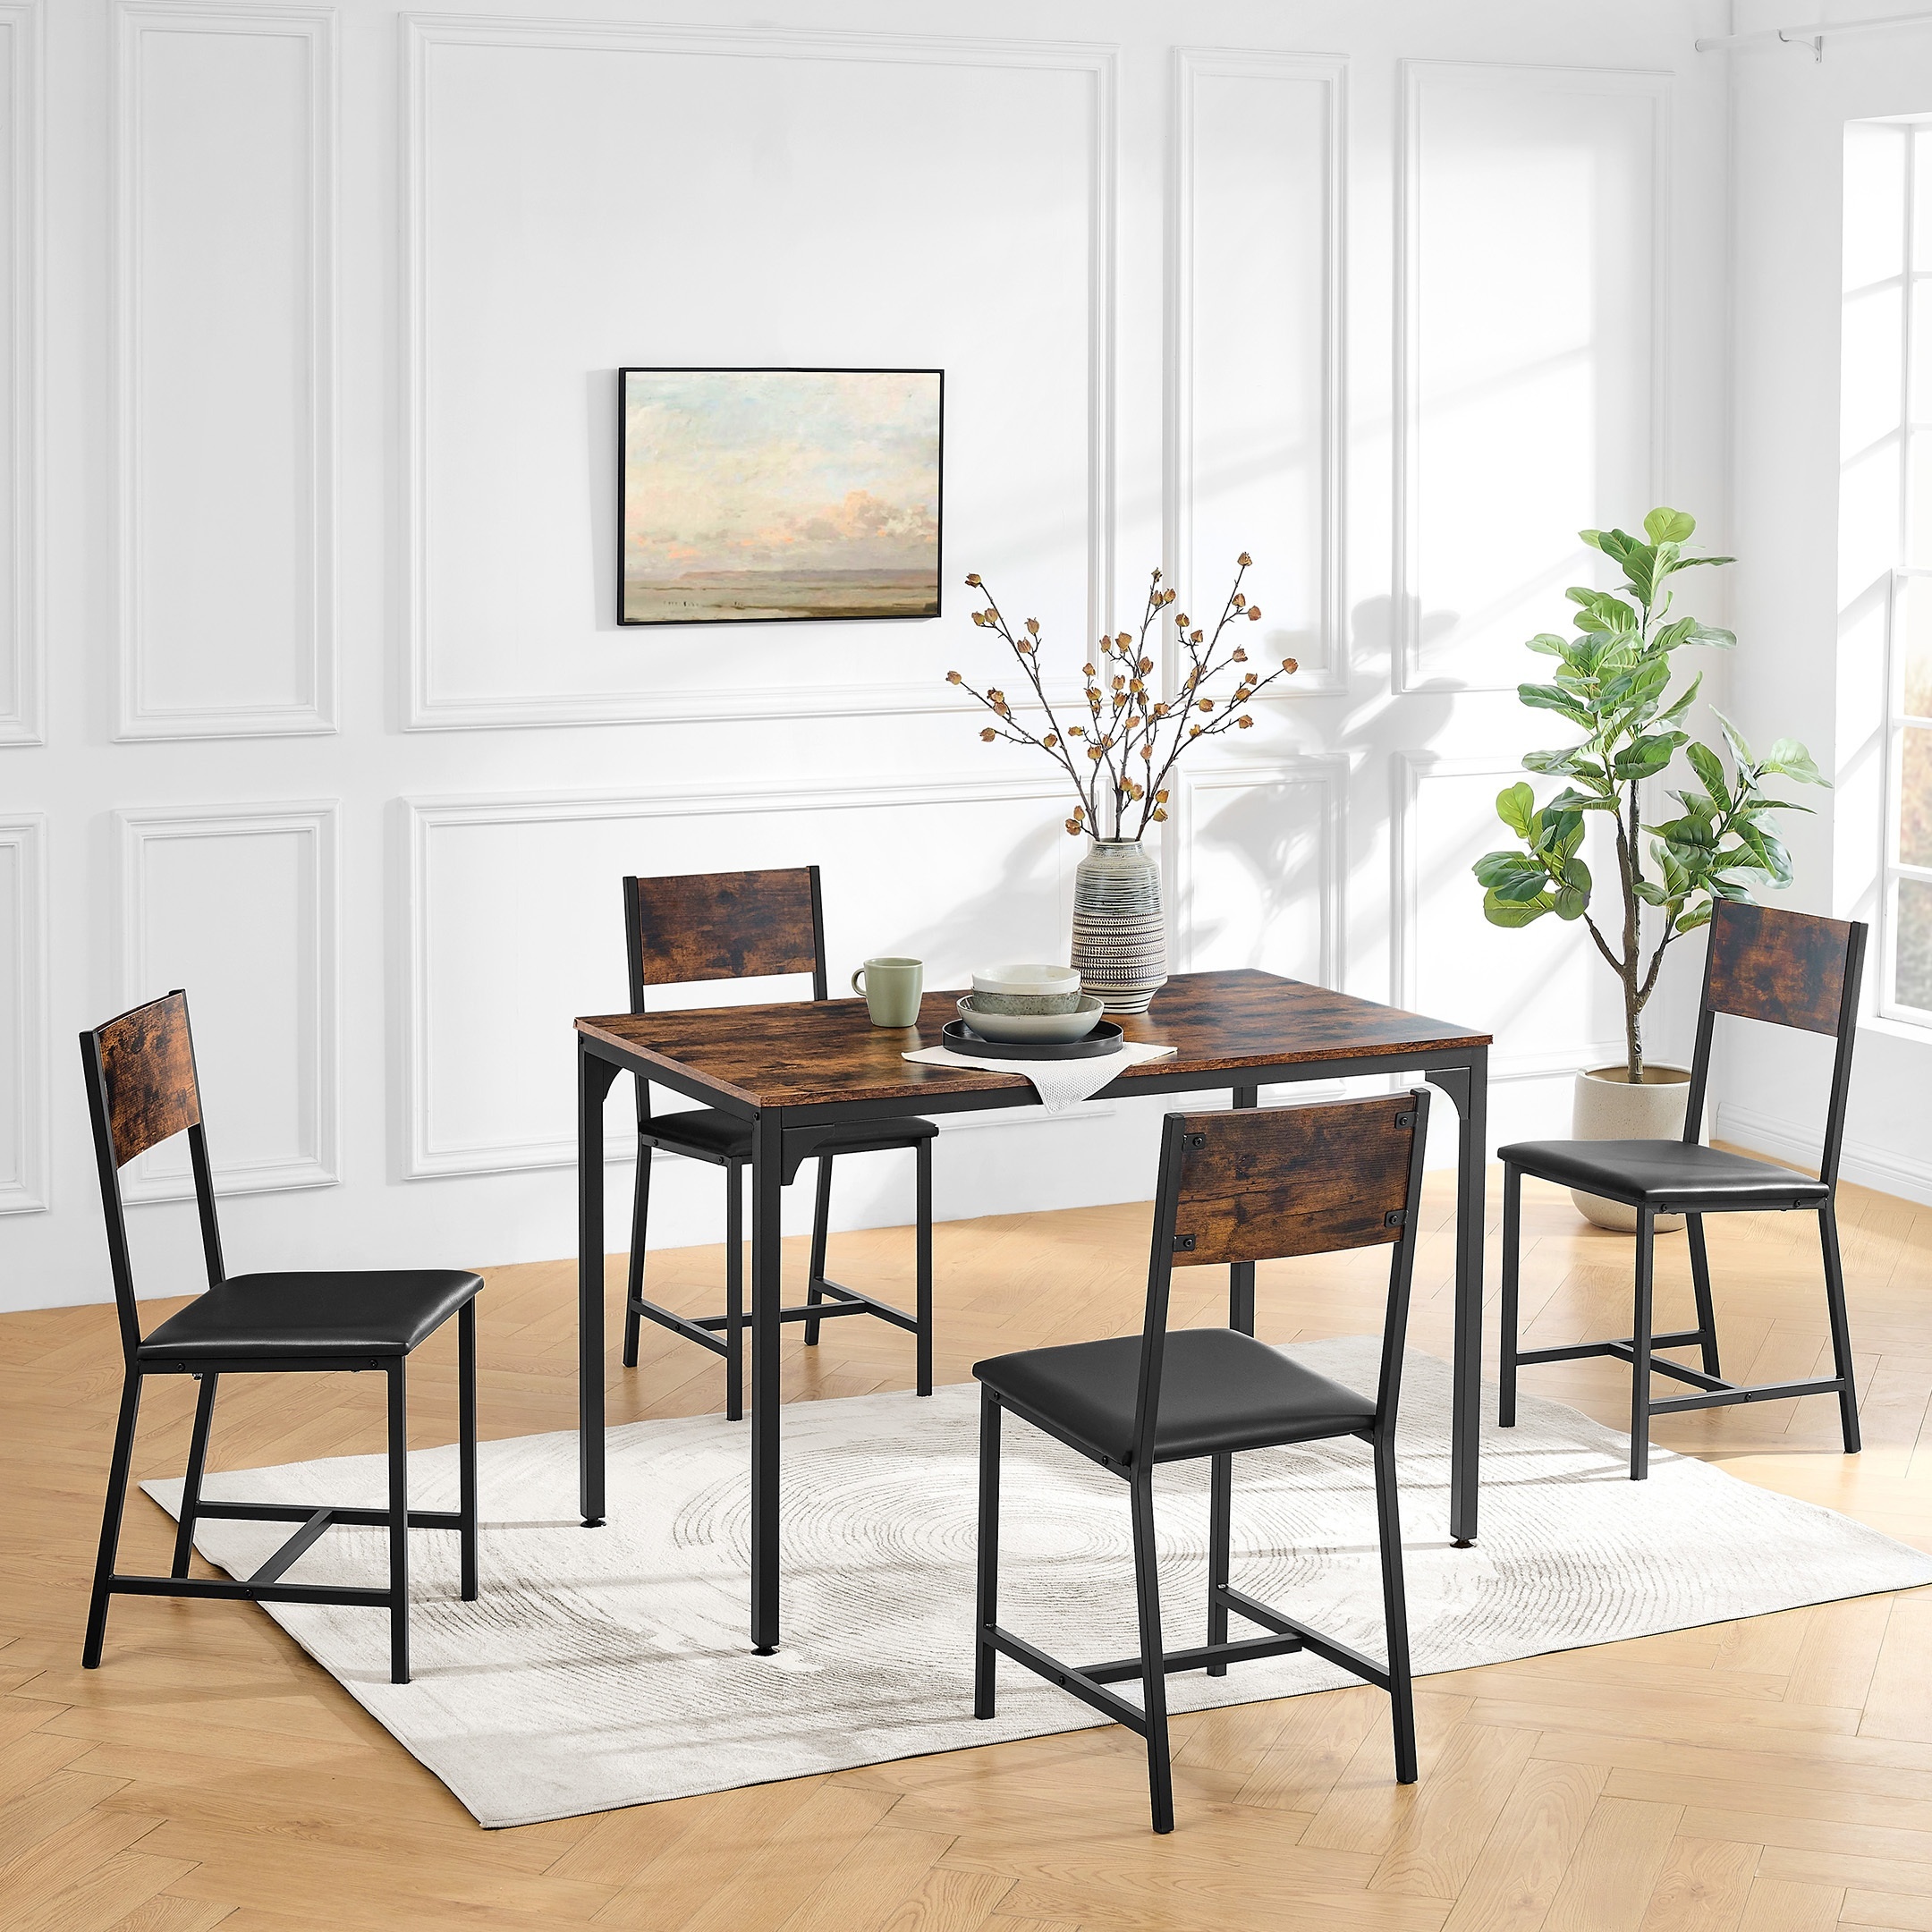 

Kitchen Table And Chairs Set, 5 Piece Dining Table Set For 4, 47'' Rectangular Table, 4 Chairs With Upholstered Seats